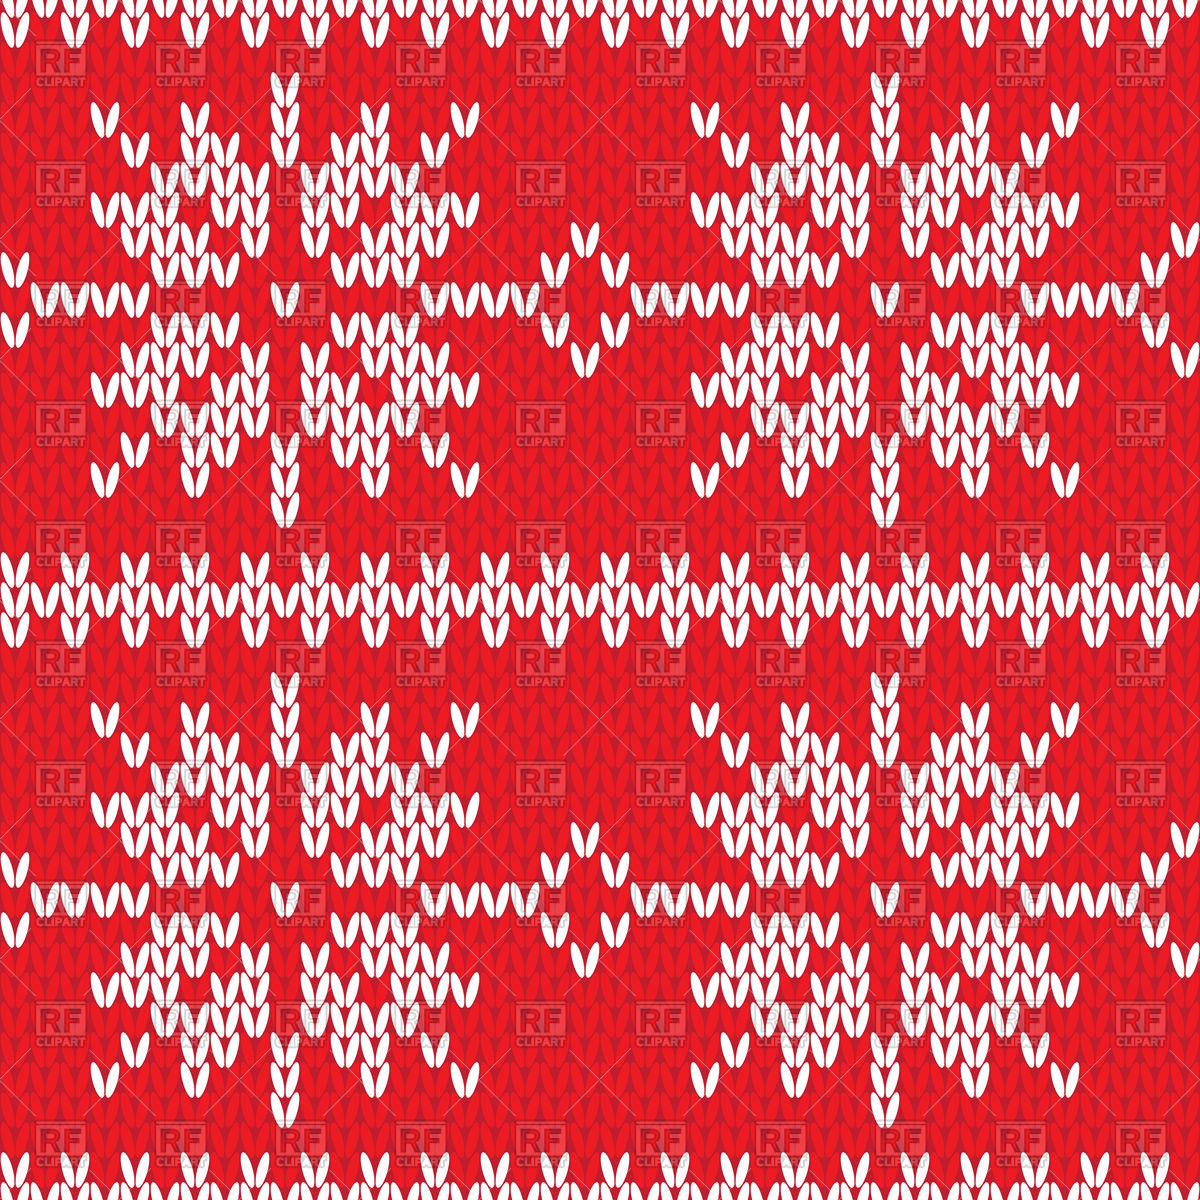 Knitted Snowflake Pattern Seamless Red Knitted Pattern Made Of White Snowflakes Stock Vector Image